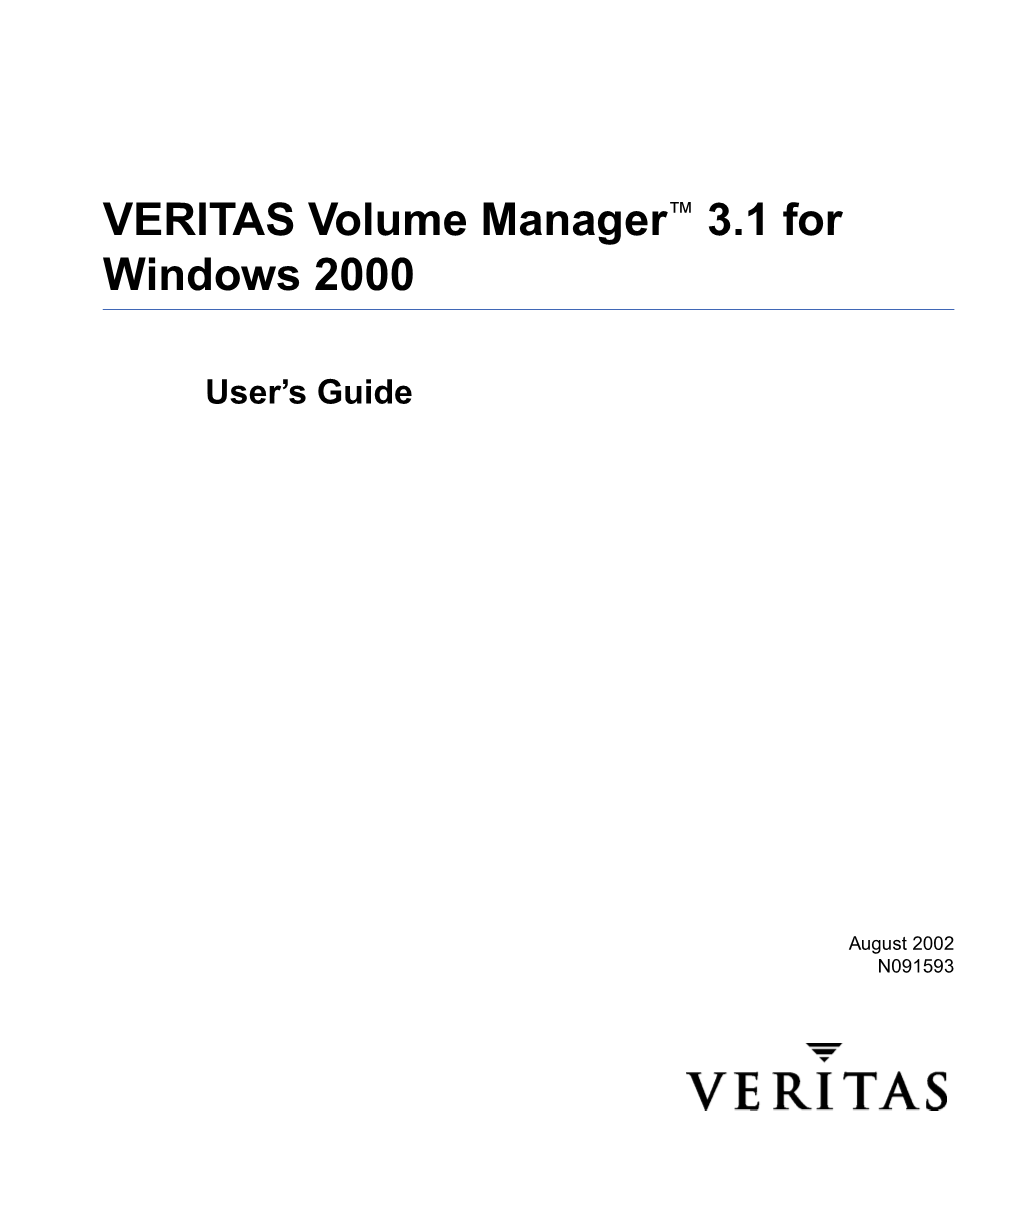 Volume Manager 3.1 for Windows 2000 User's Guide